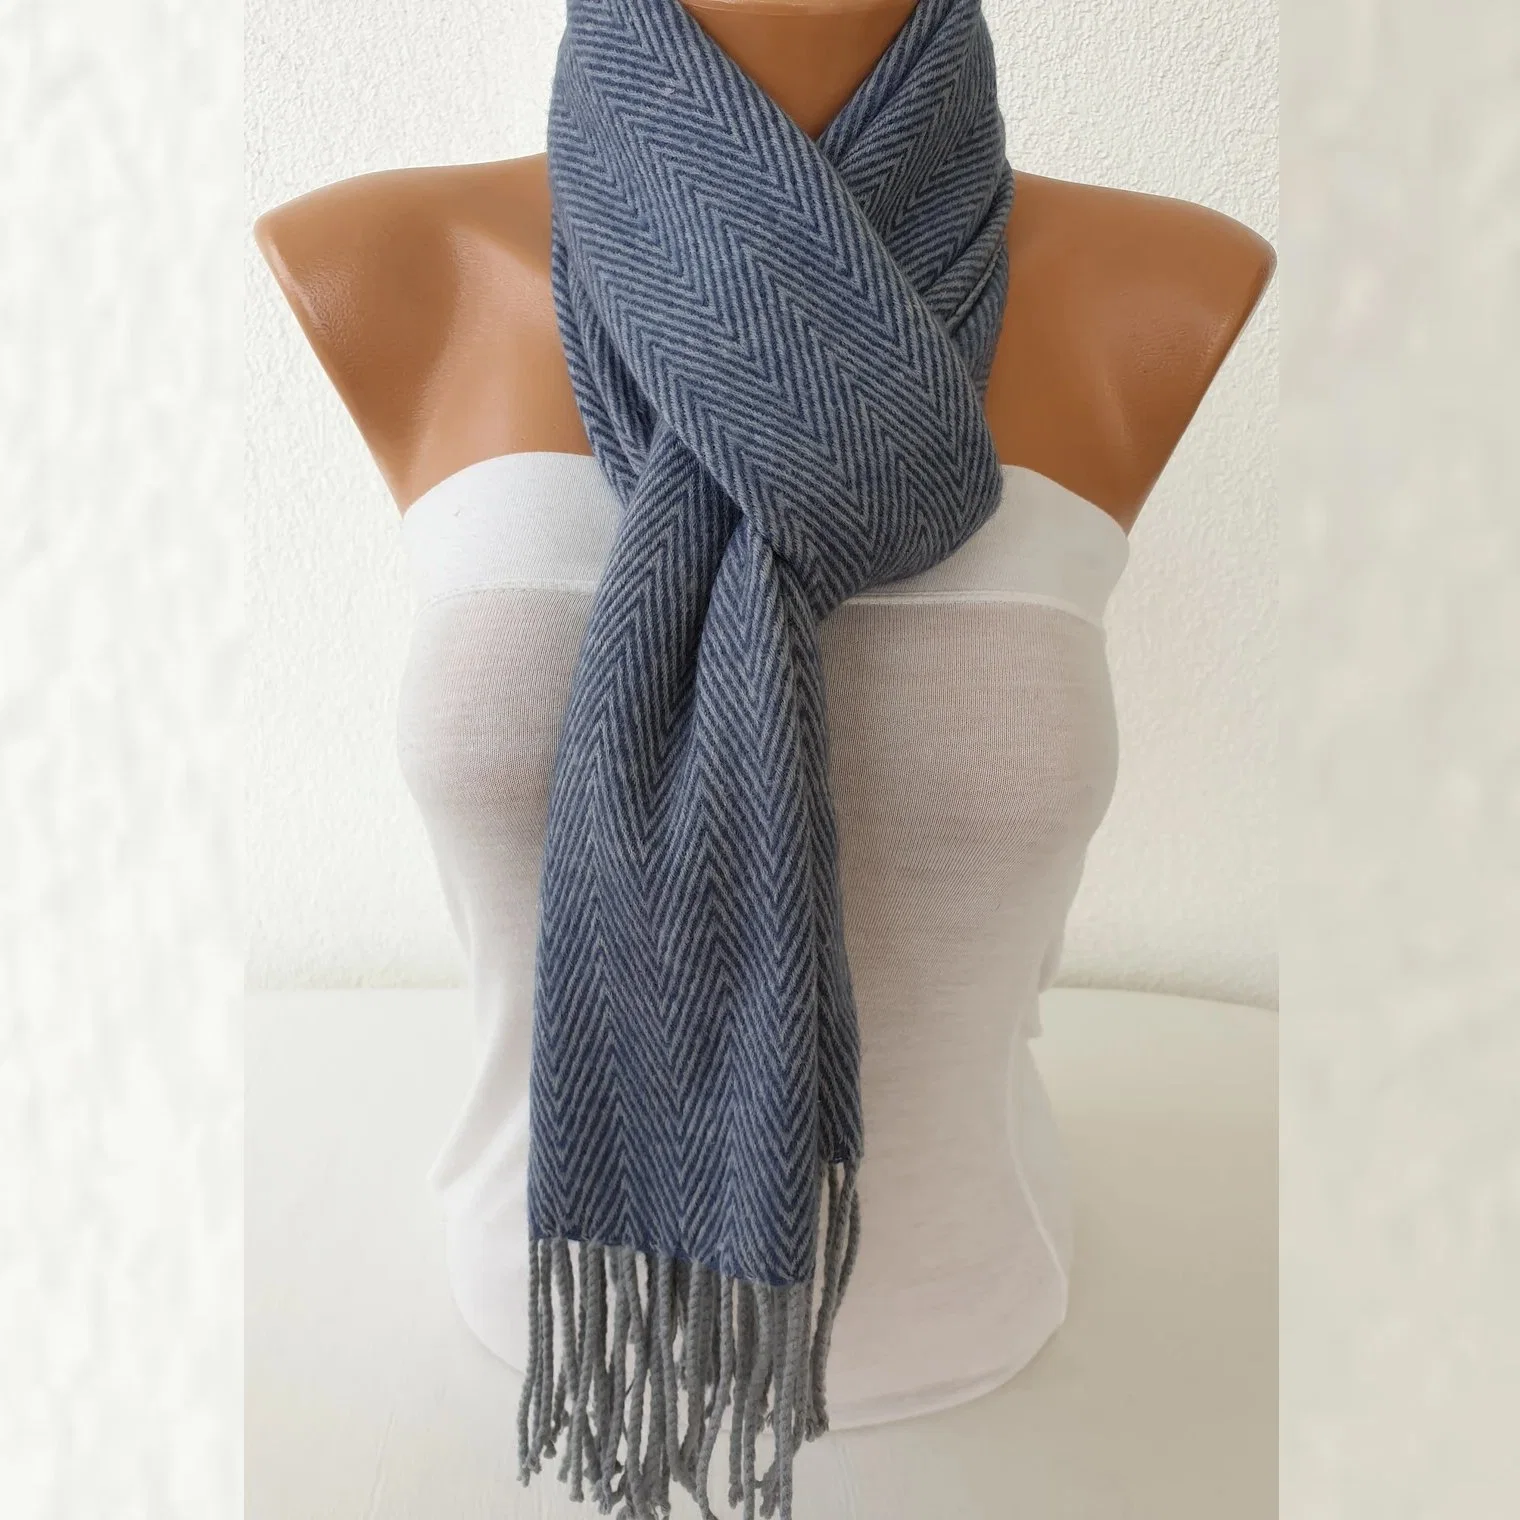 Unisex 100% Cashmere Herringbone Woven Apparel Accessories Scarf with Fringe